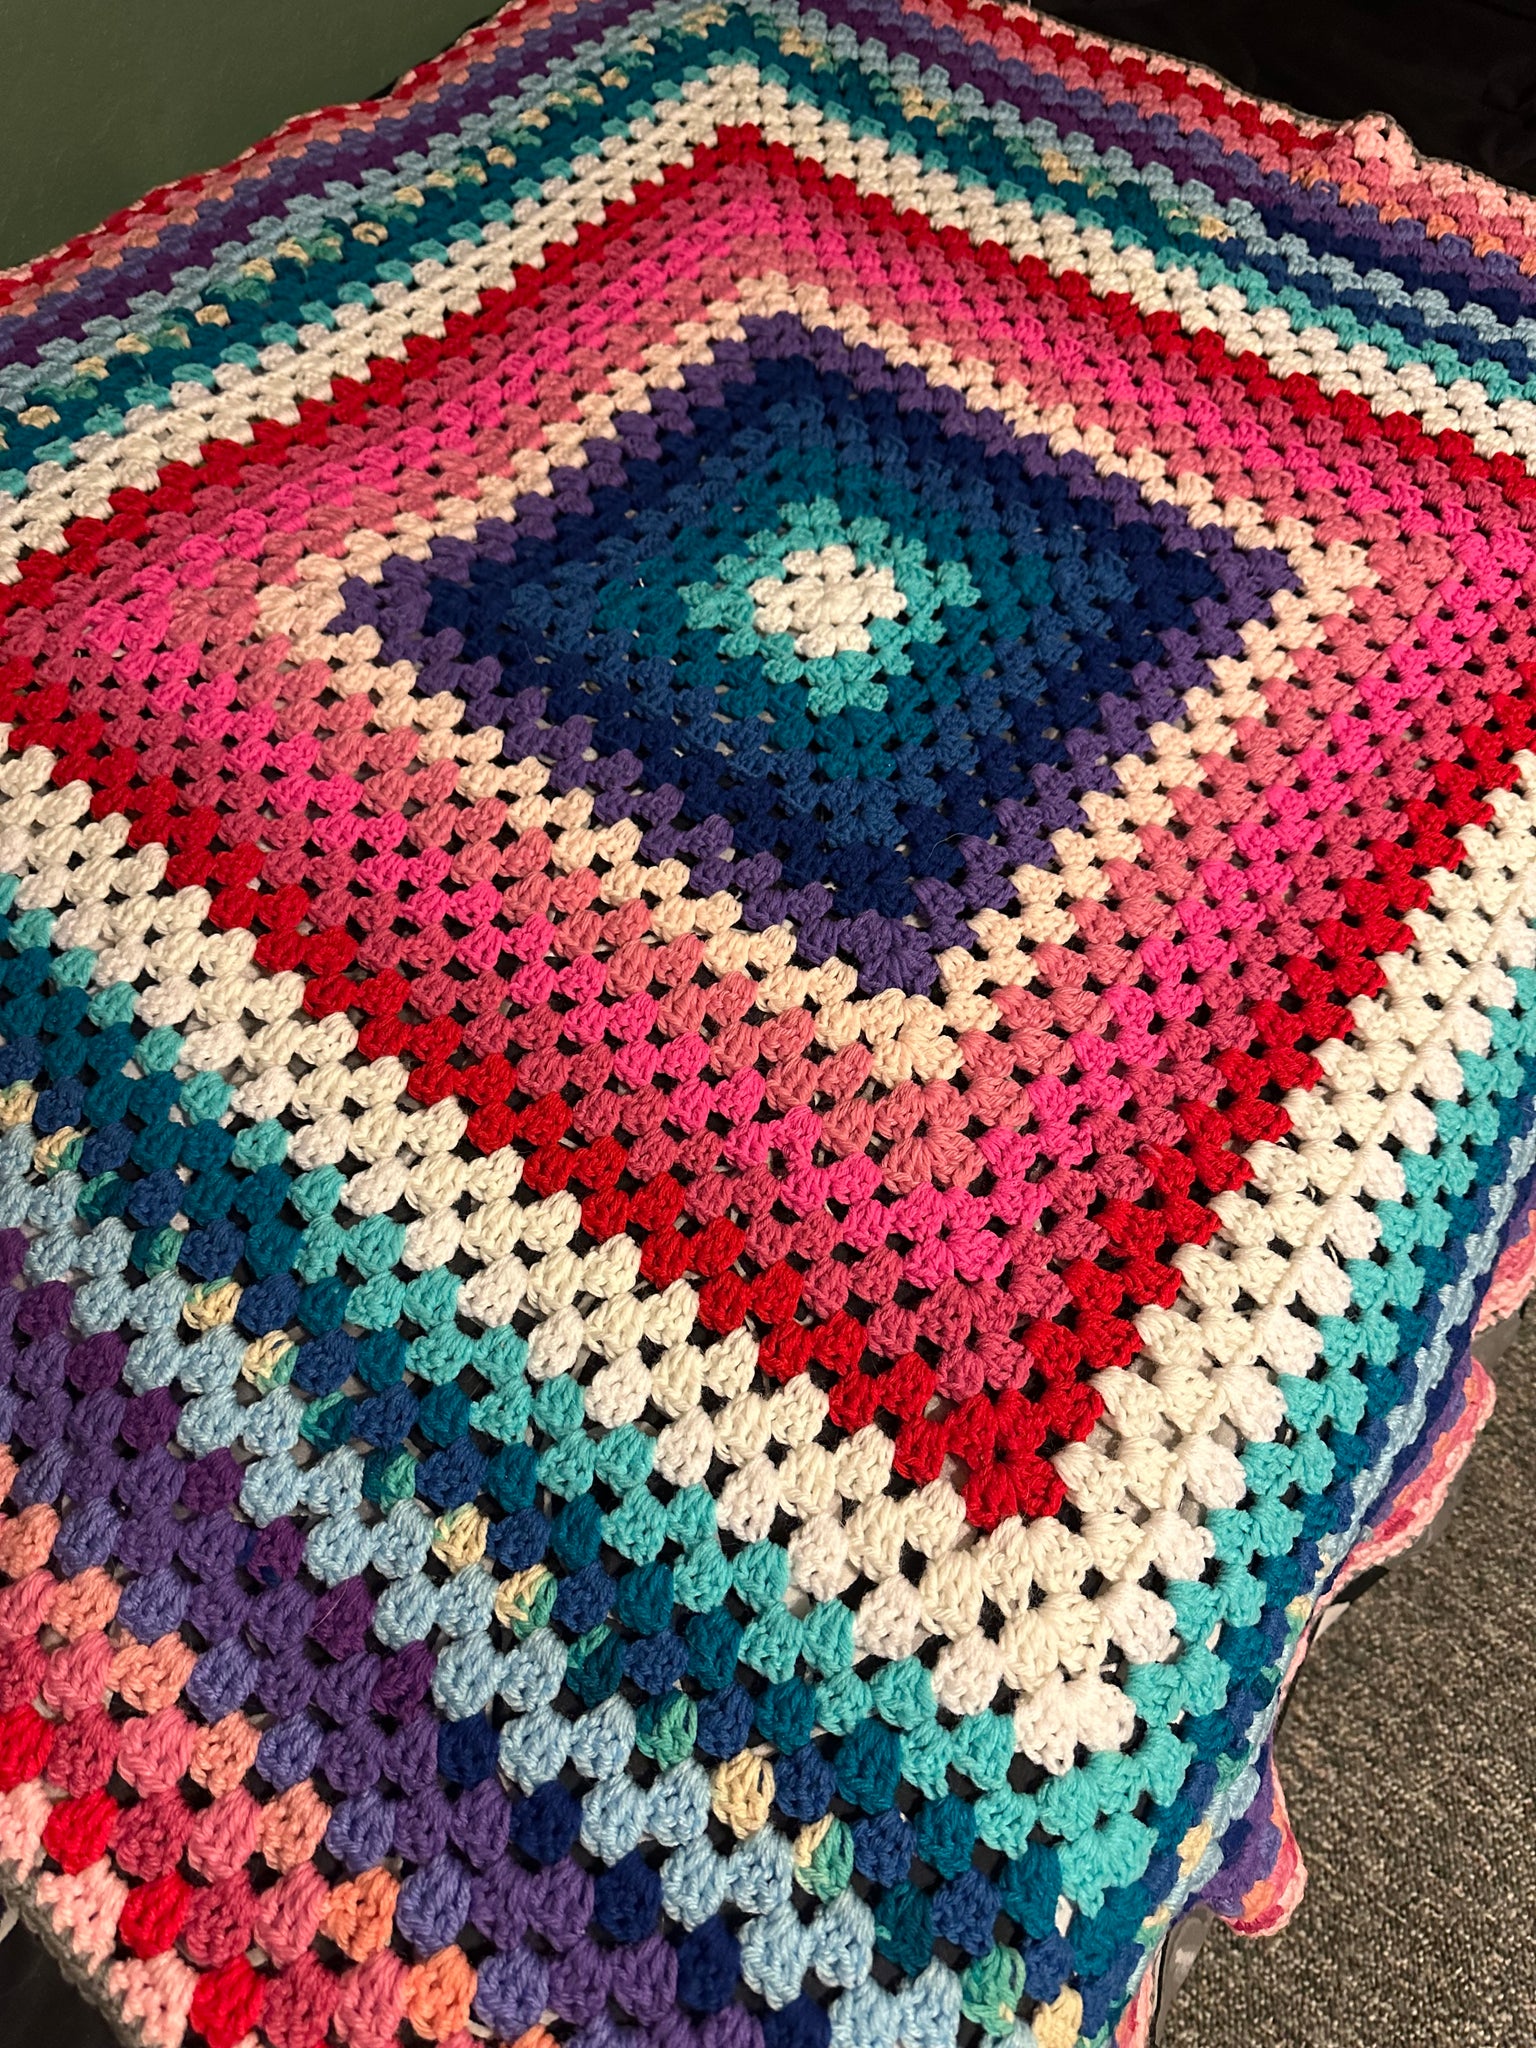 Crocheted Granny Square Afghan